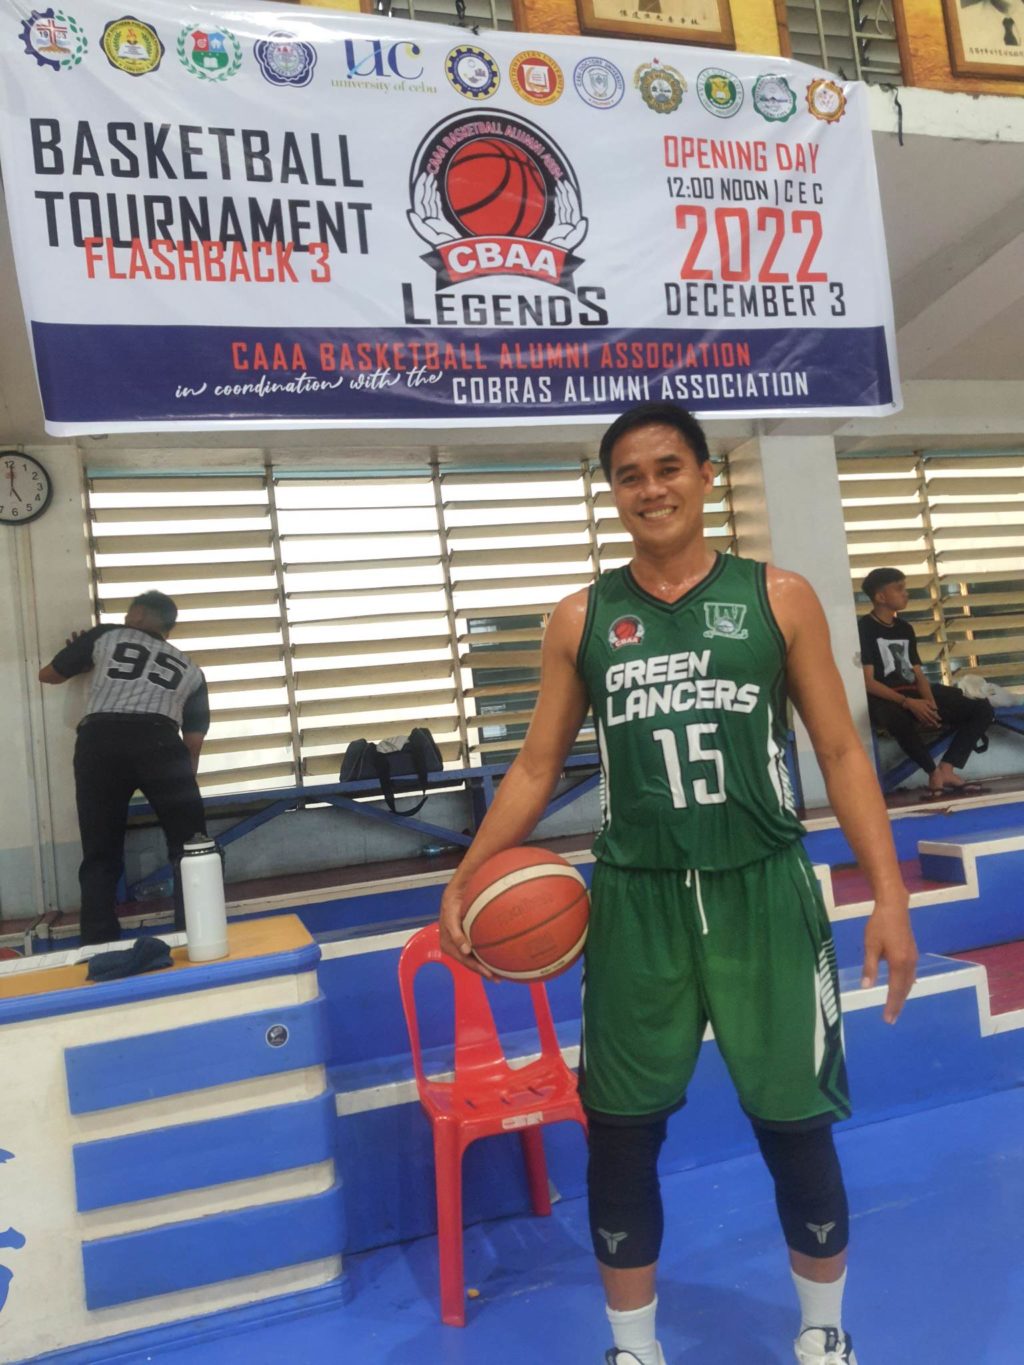 Jonel Maglasang leads the University of the Visayas to a first win in the Legends Basketball Tournament Flashback 3 on Dec. 3. UV routed the University of Southern Philippines (USP) in the 40-above category. | Contributed photo